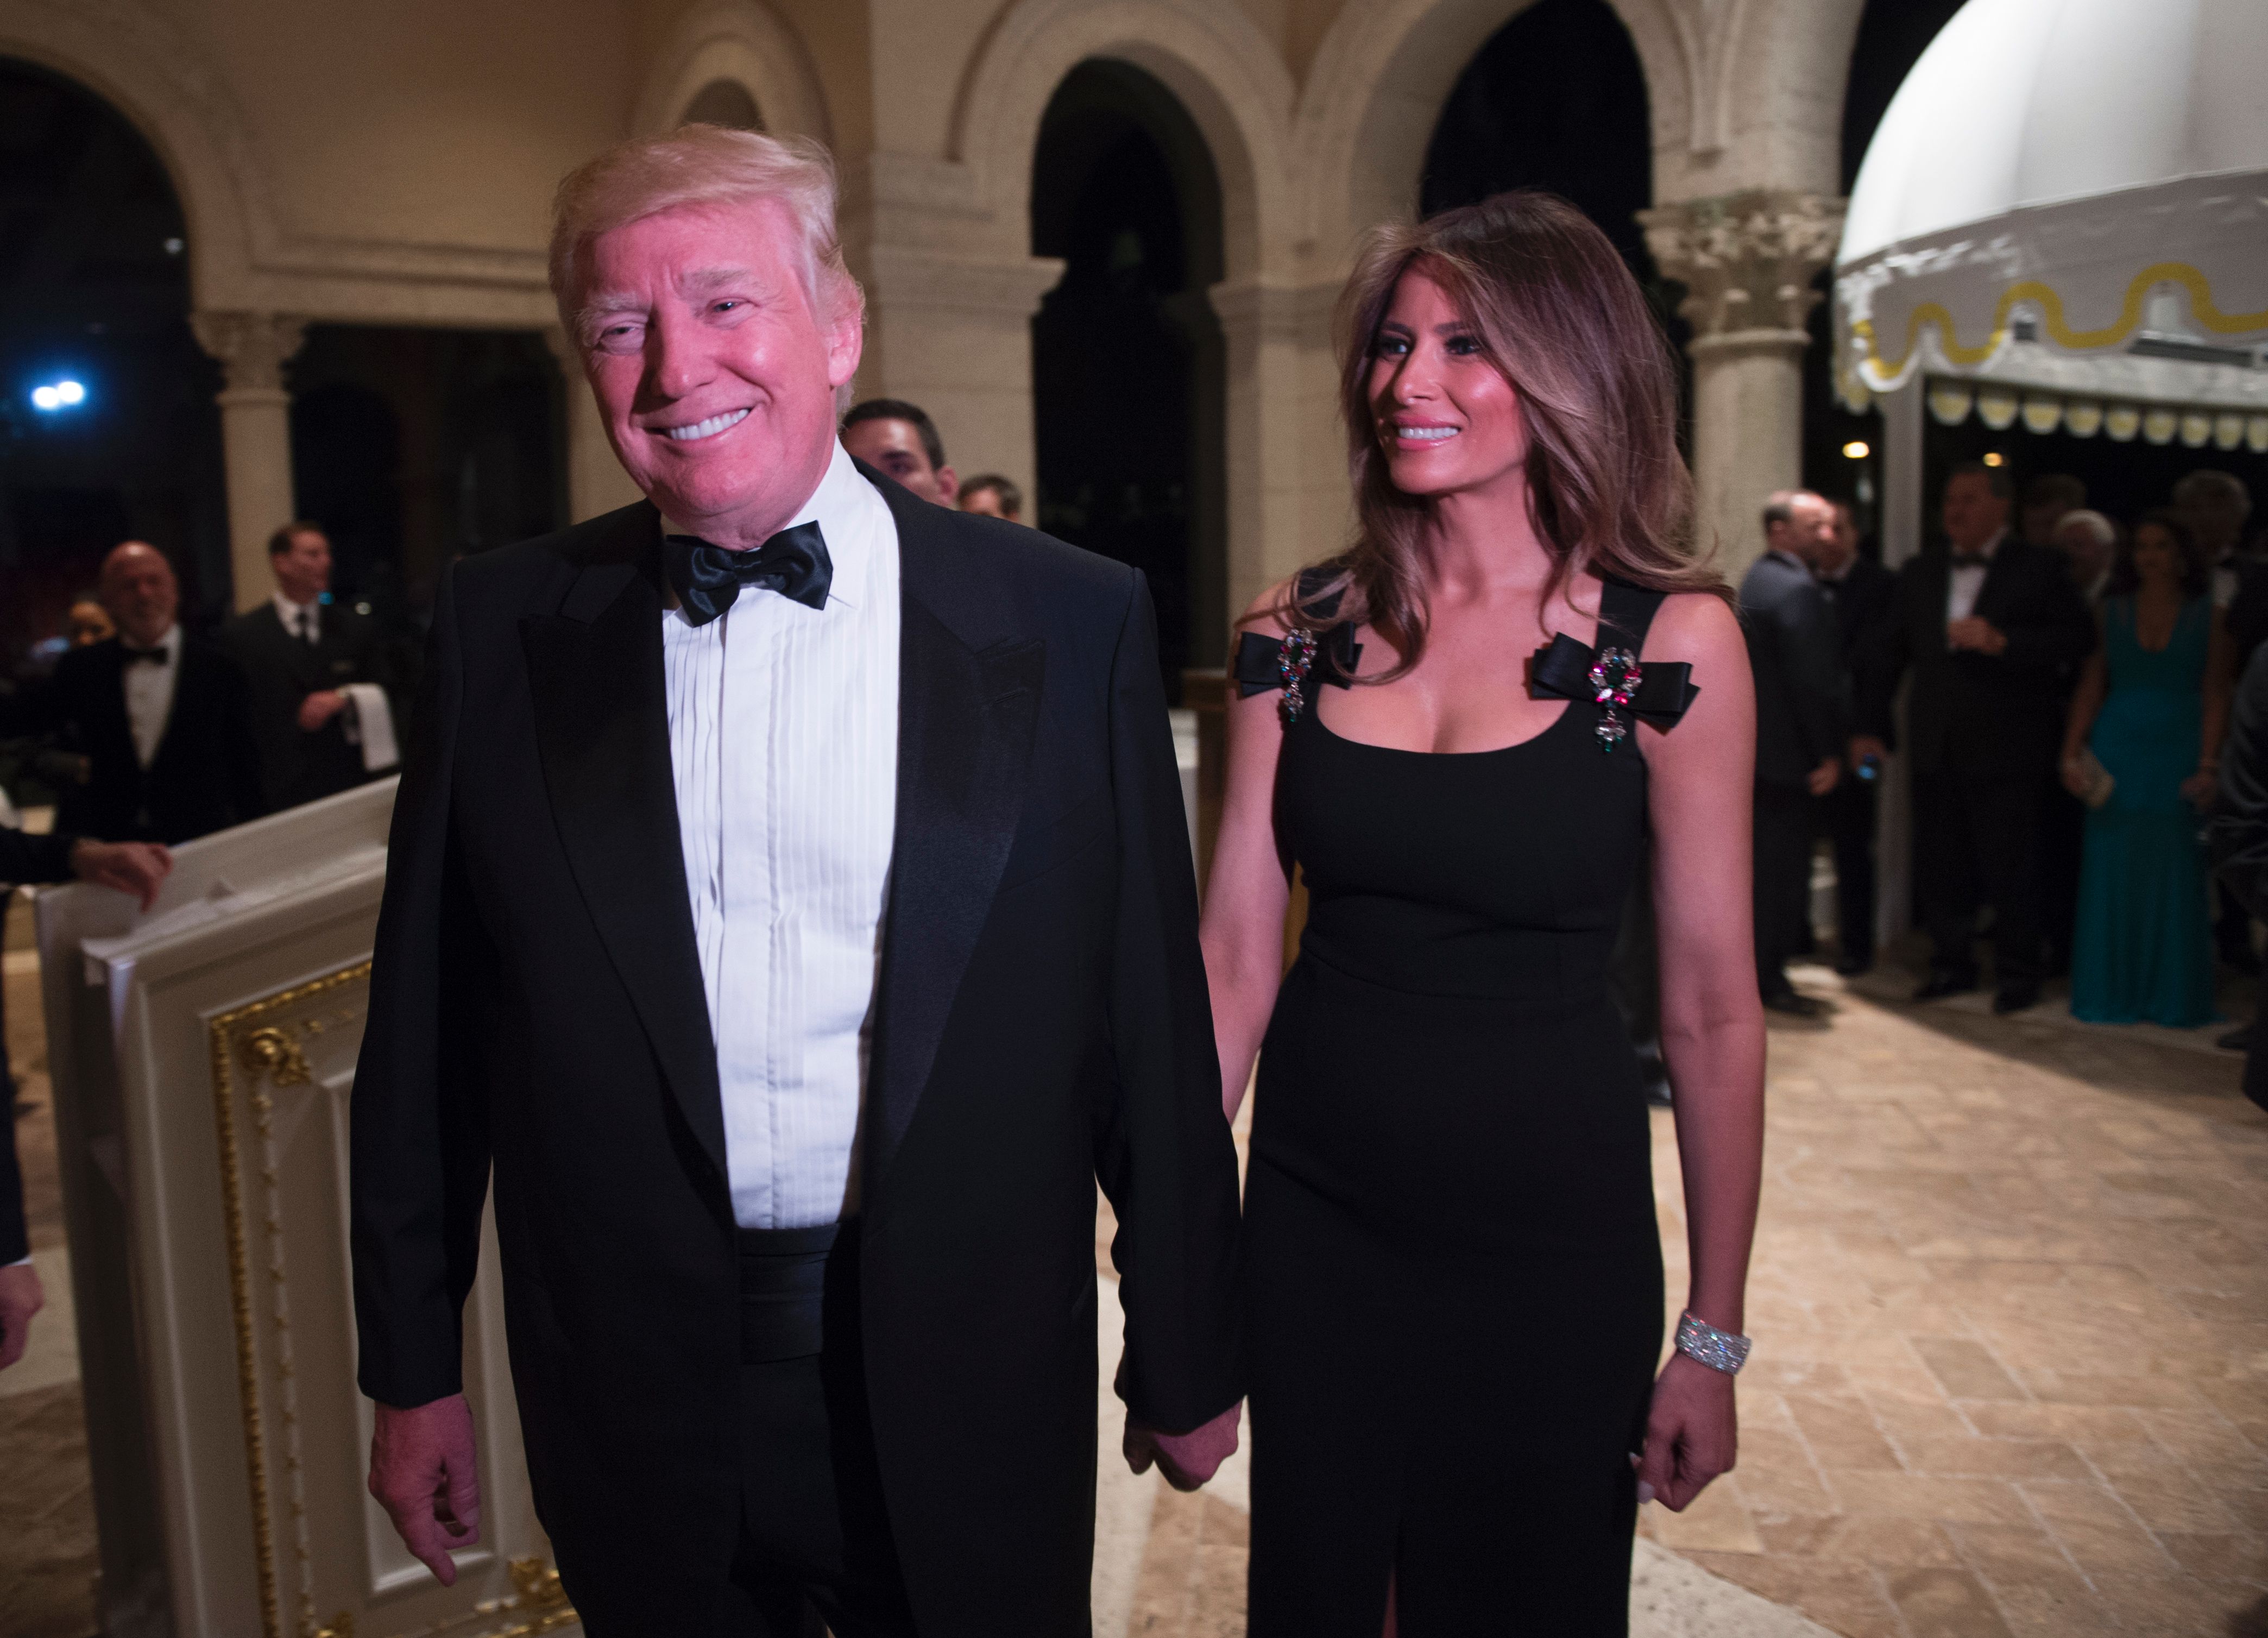 Here's How Much It Costs to Ring in the New Year with President Trump at Mar-a-Lago